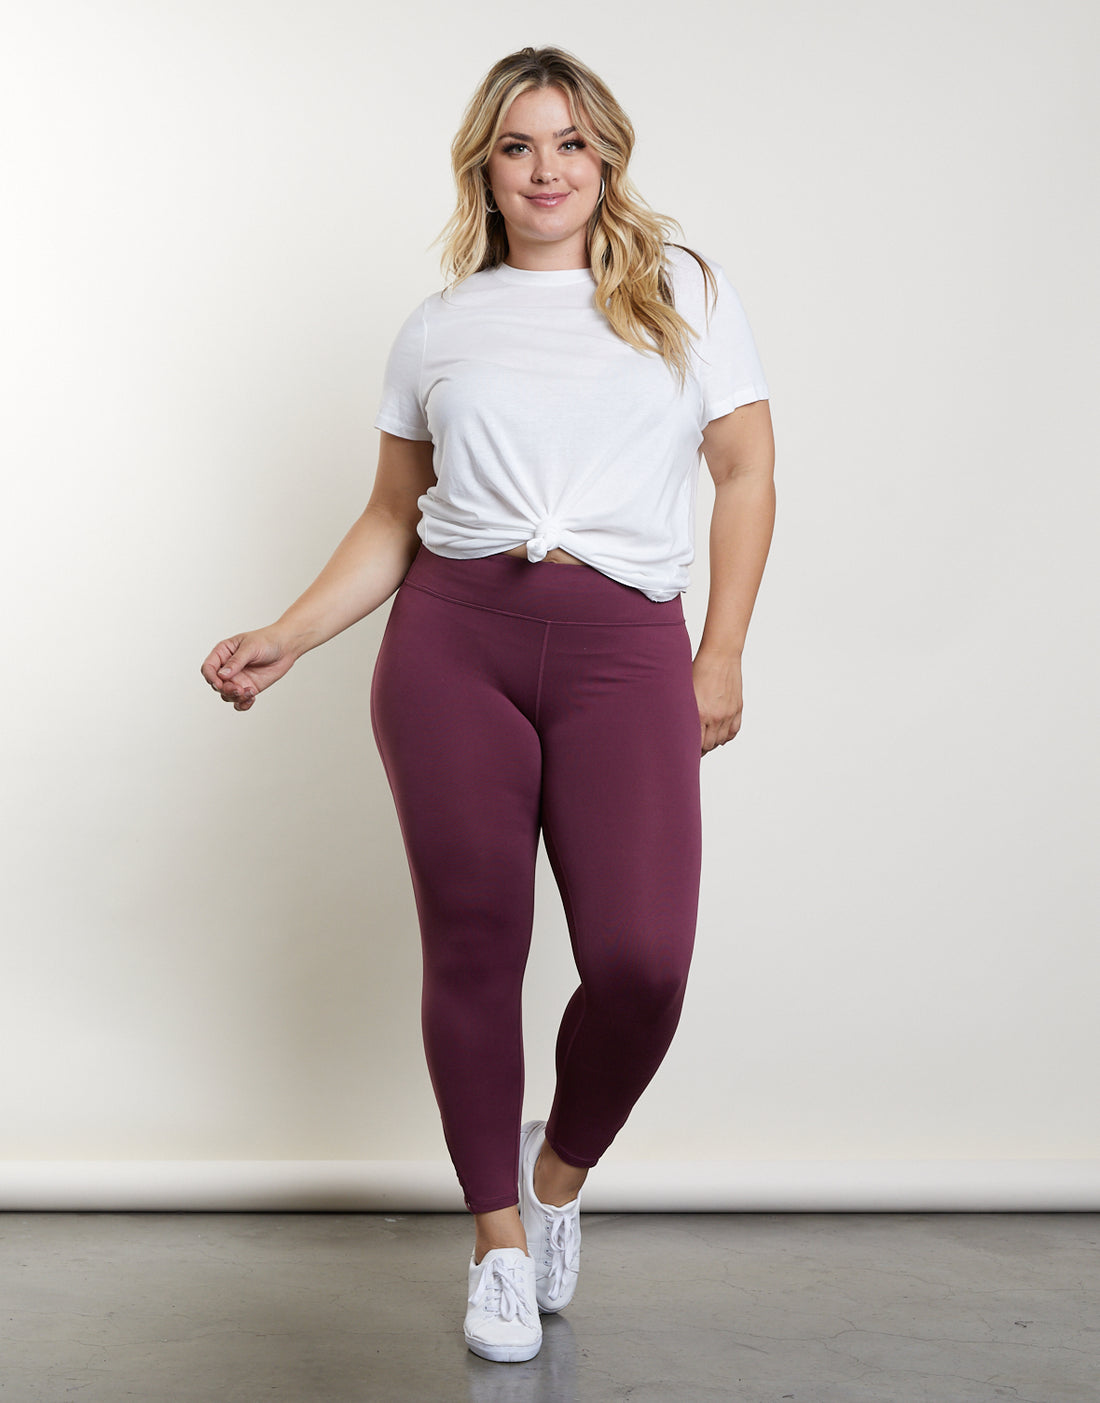 Curve In The Zone Leggings Plus Size Bottoms Burgundy XL -2020AVE